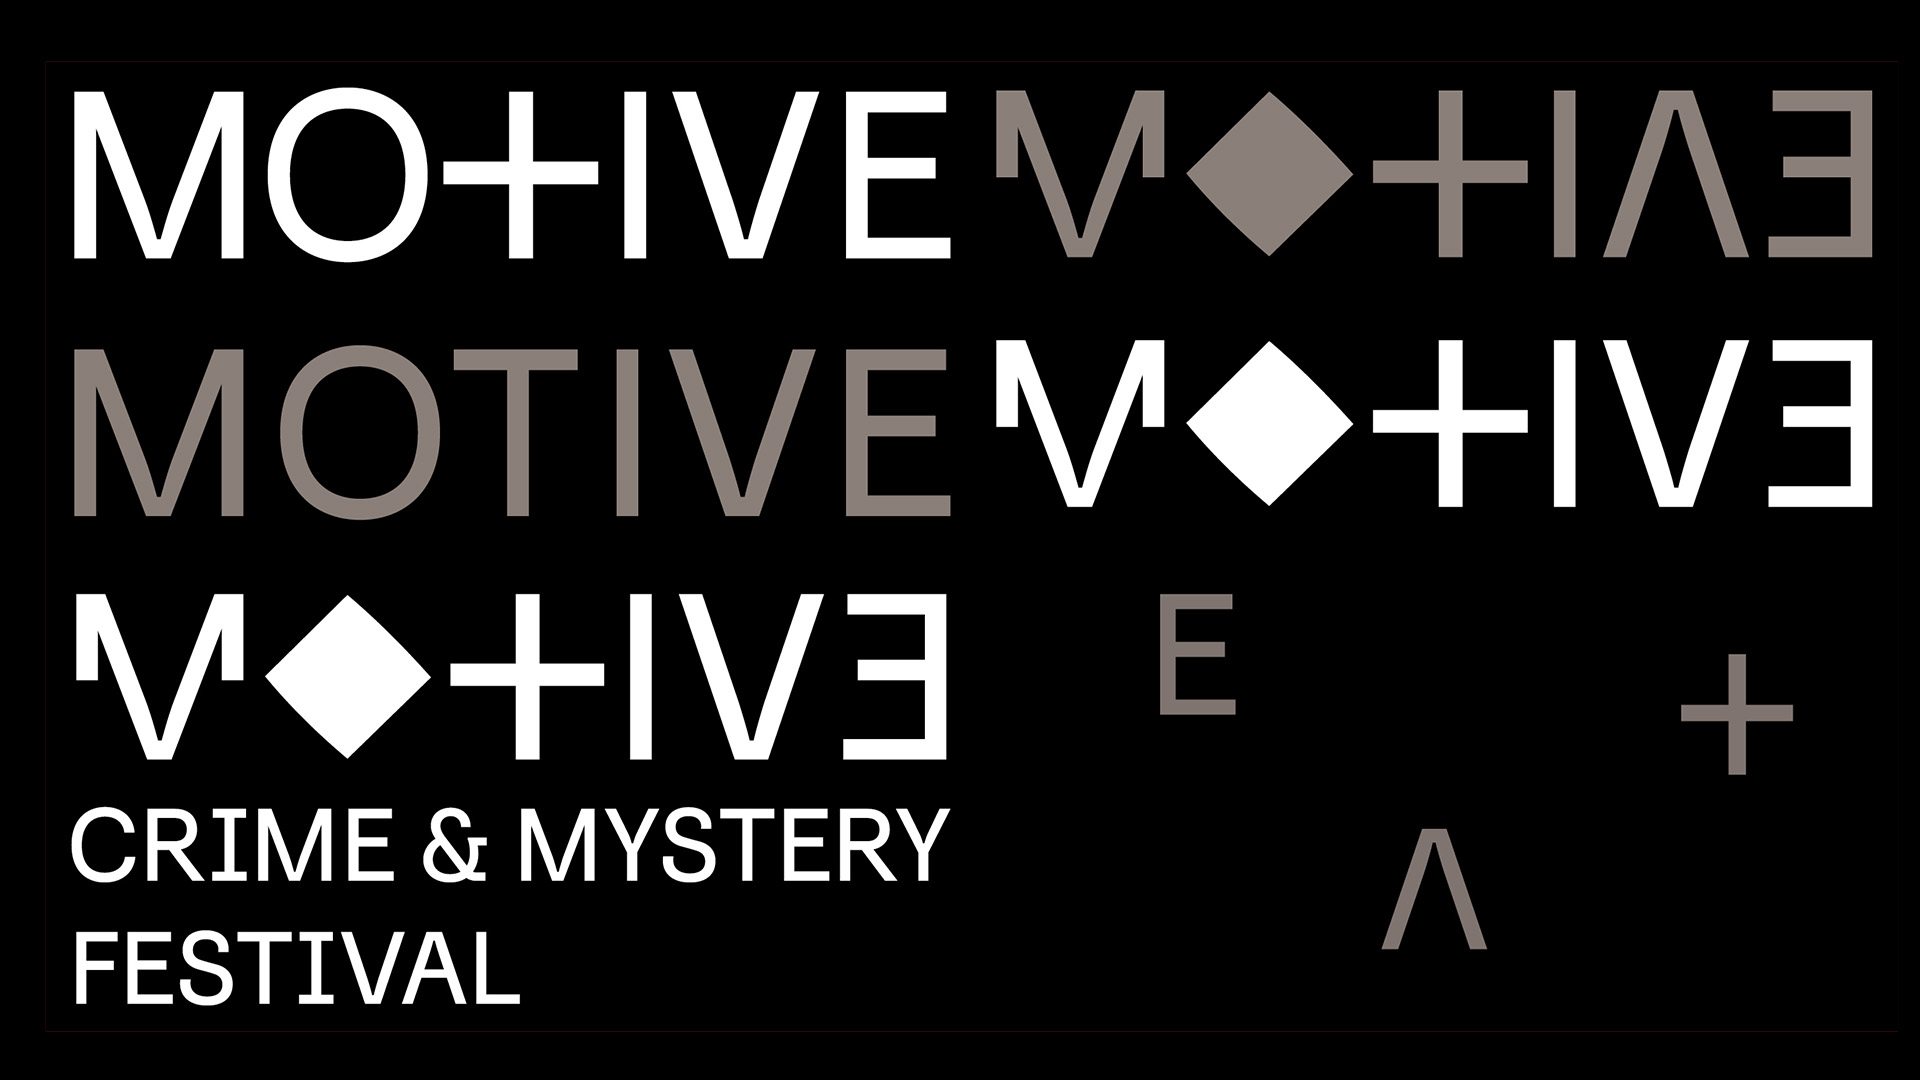 A general MOTIVE event banner with the text 